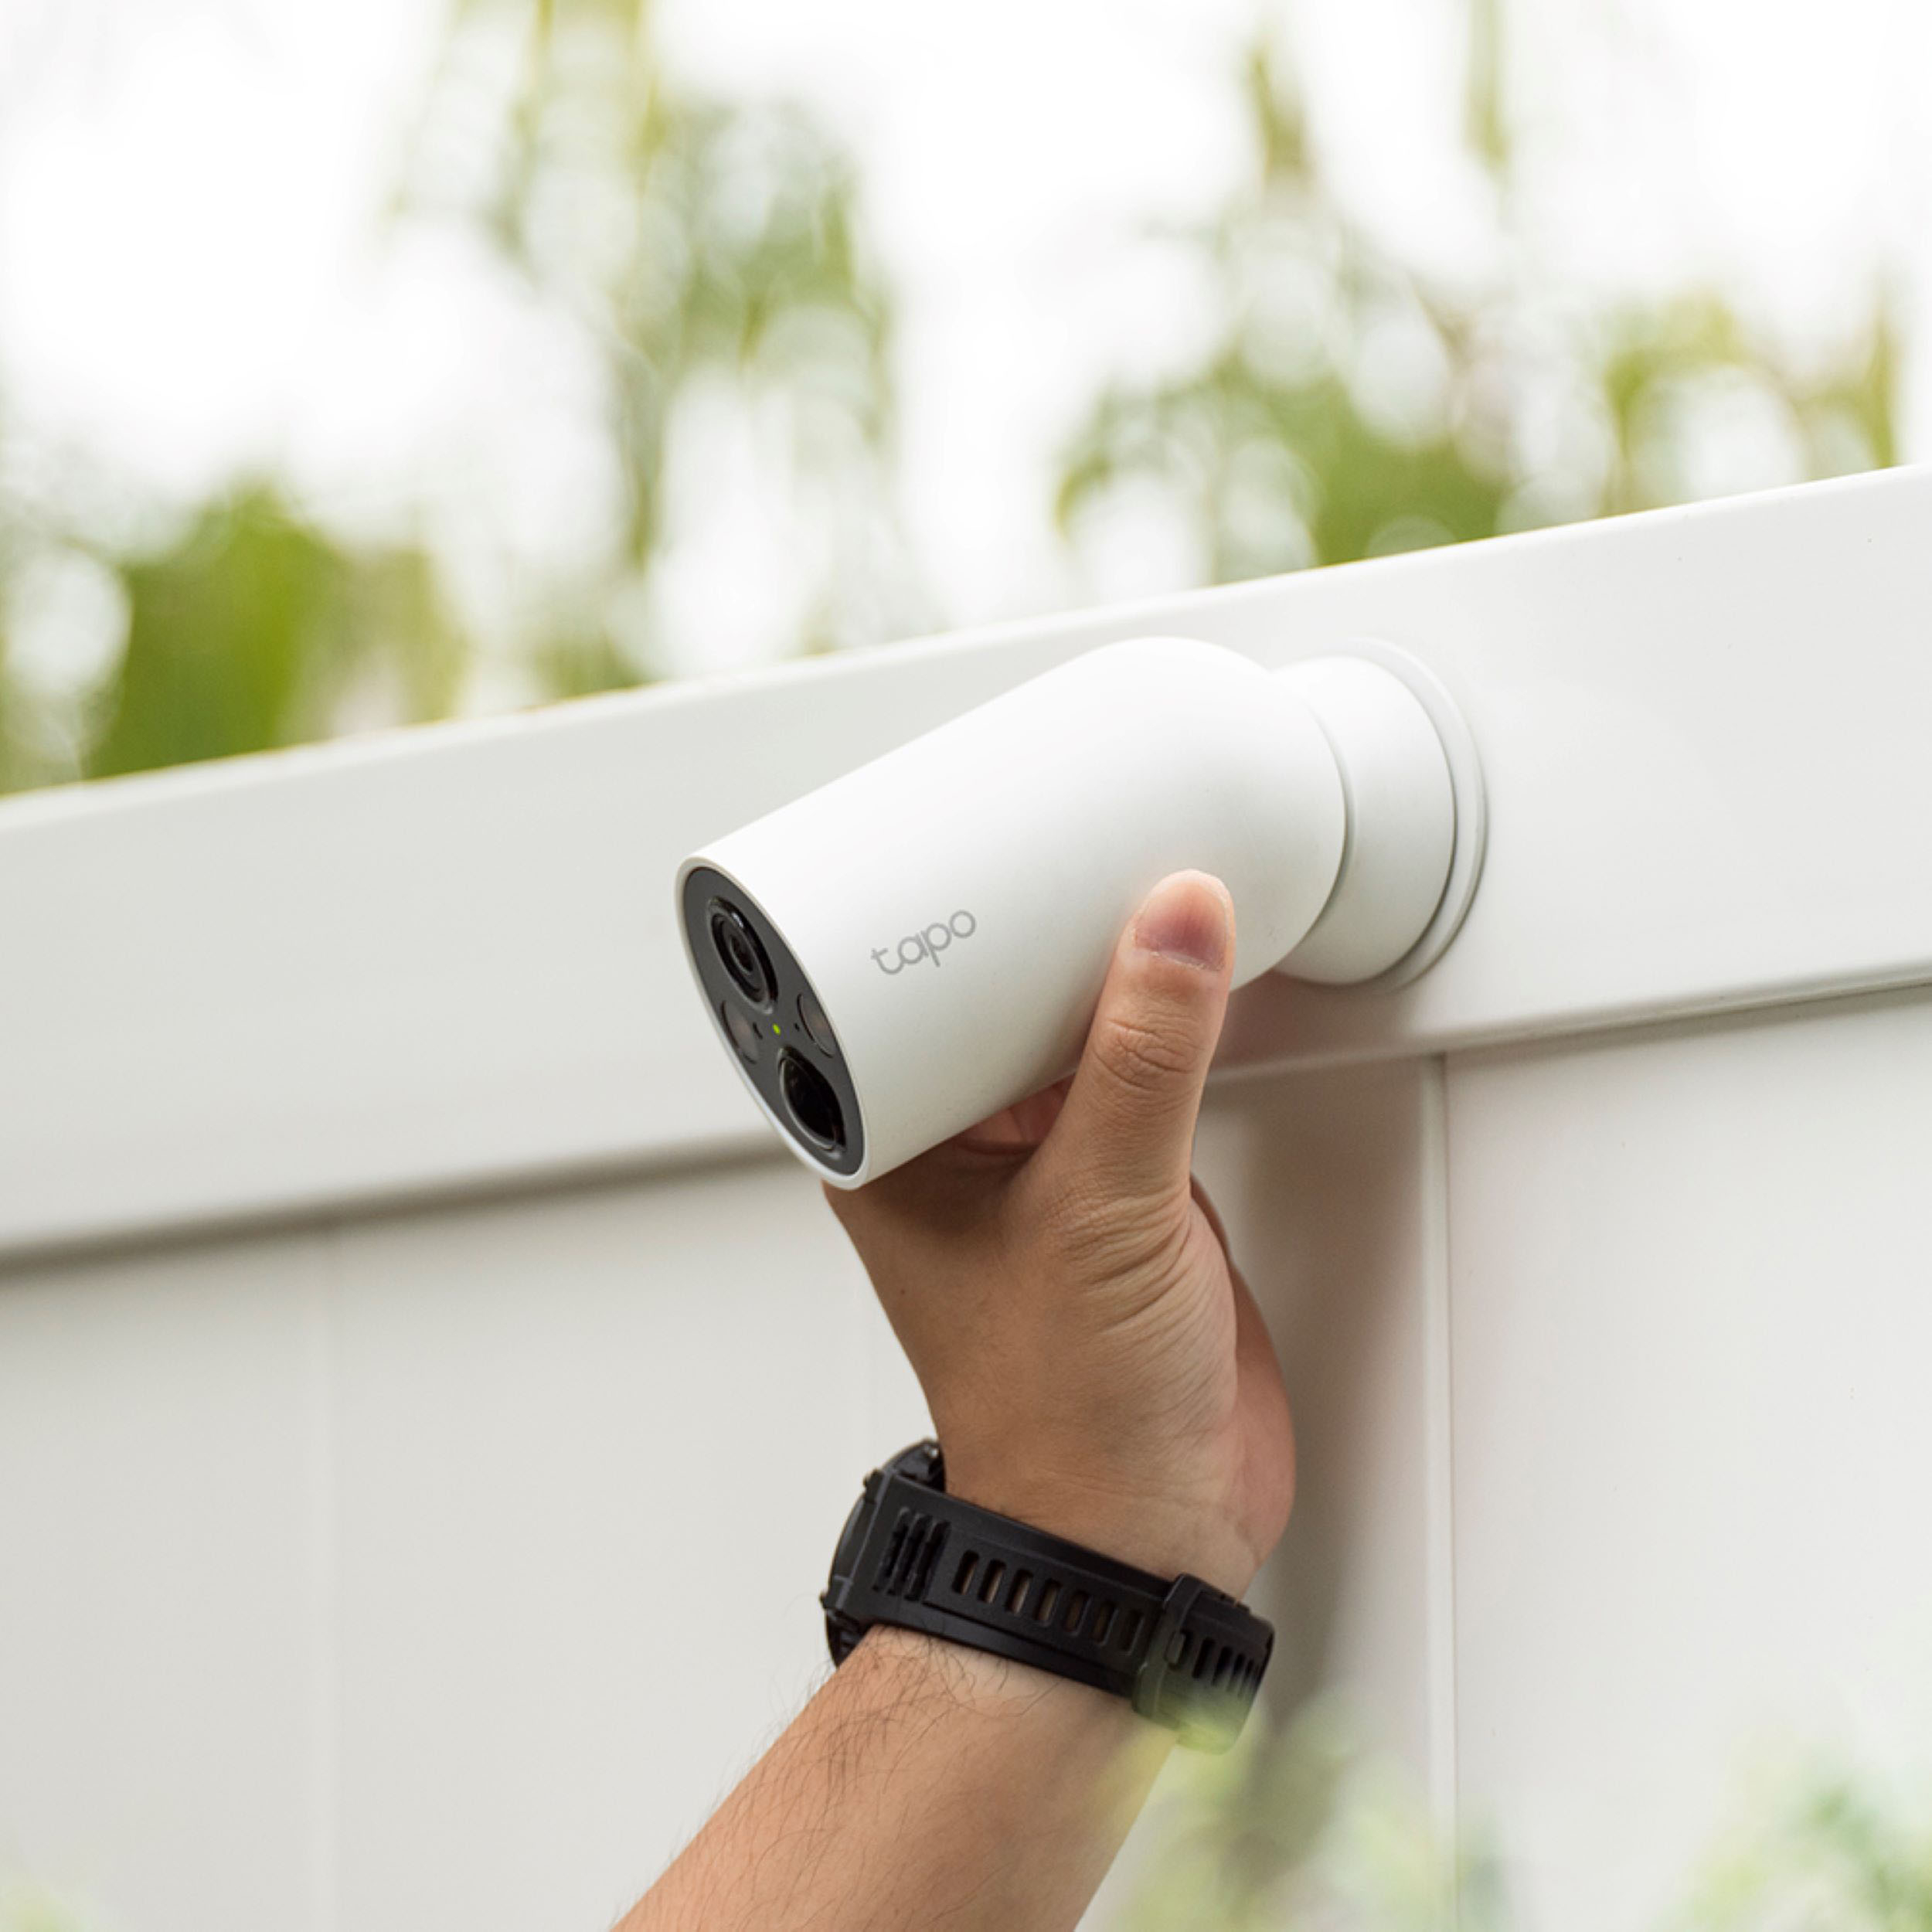 I can't believe TP-Link's Tapo wireless outdoor camera is only $80